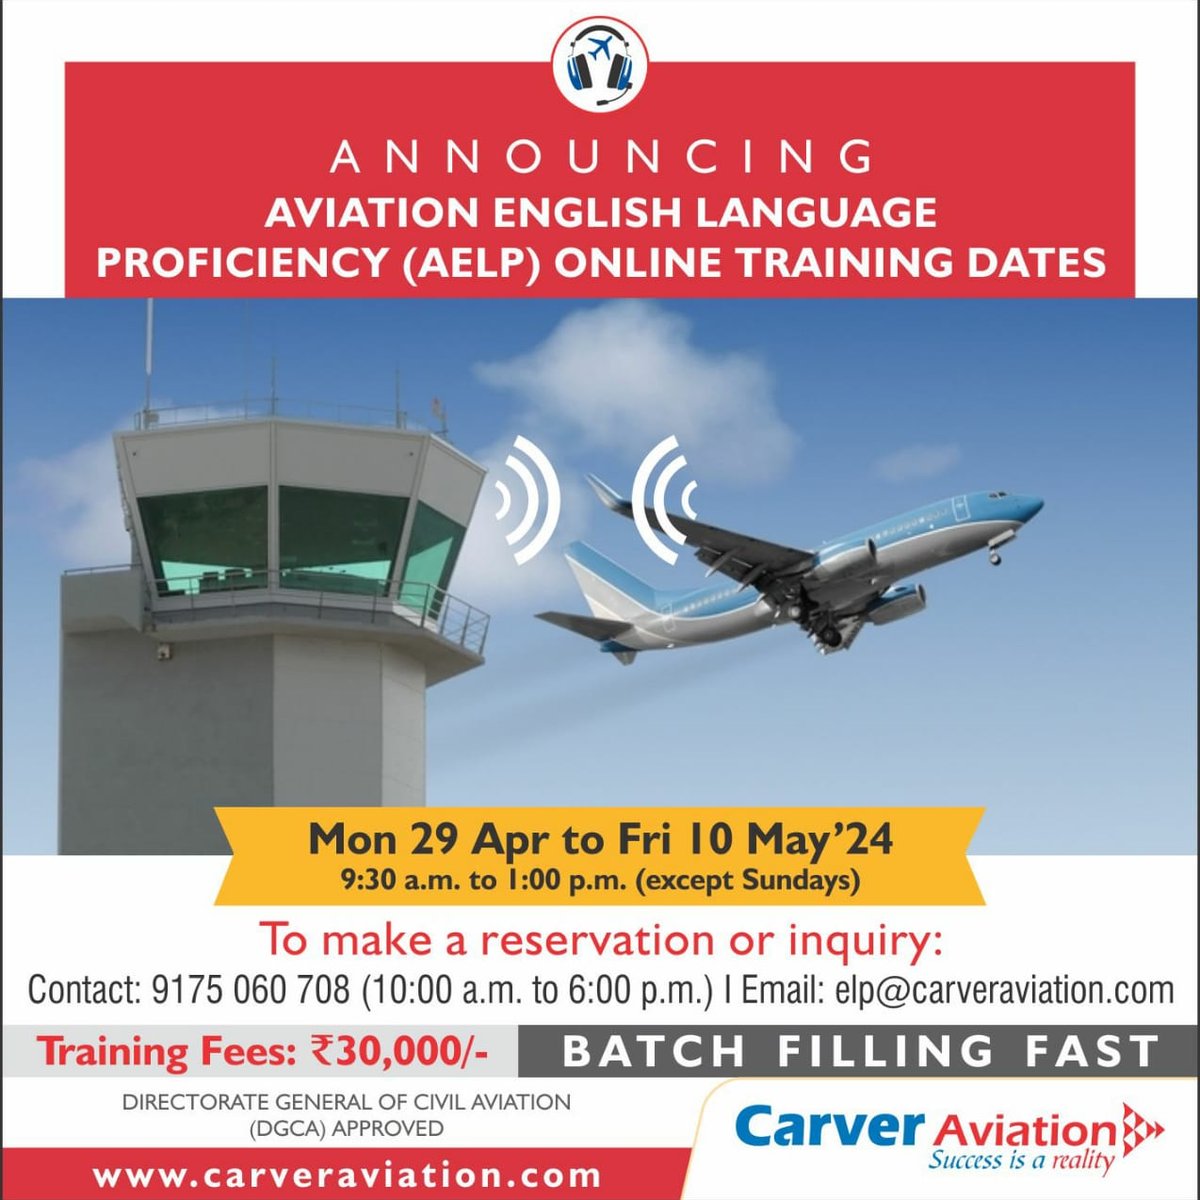 Enrol for the DGCA MANDATED Aviation English training program. today! 
Slots filling up quickly - book your seat TODAY…!!

Call now to know more : 9175060708

#aelptraining #aelp #pilottraining #pilotcourse #englishlanguage #aviationlanguage #onlinetraining #CarverAviation